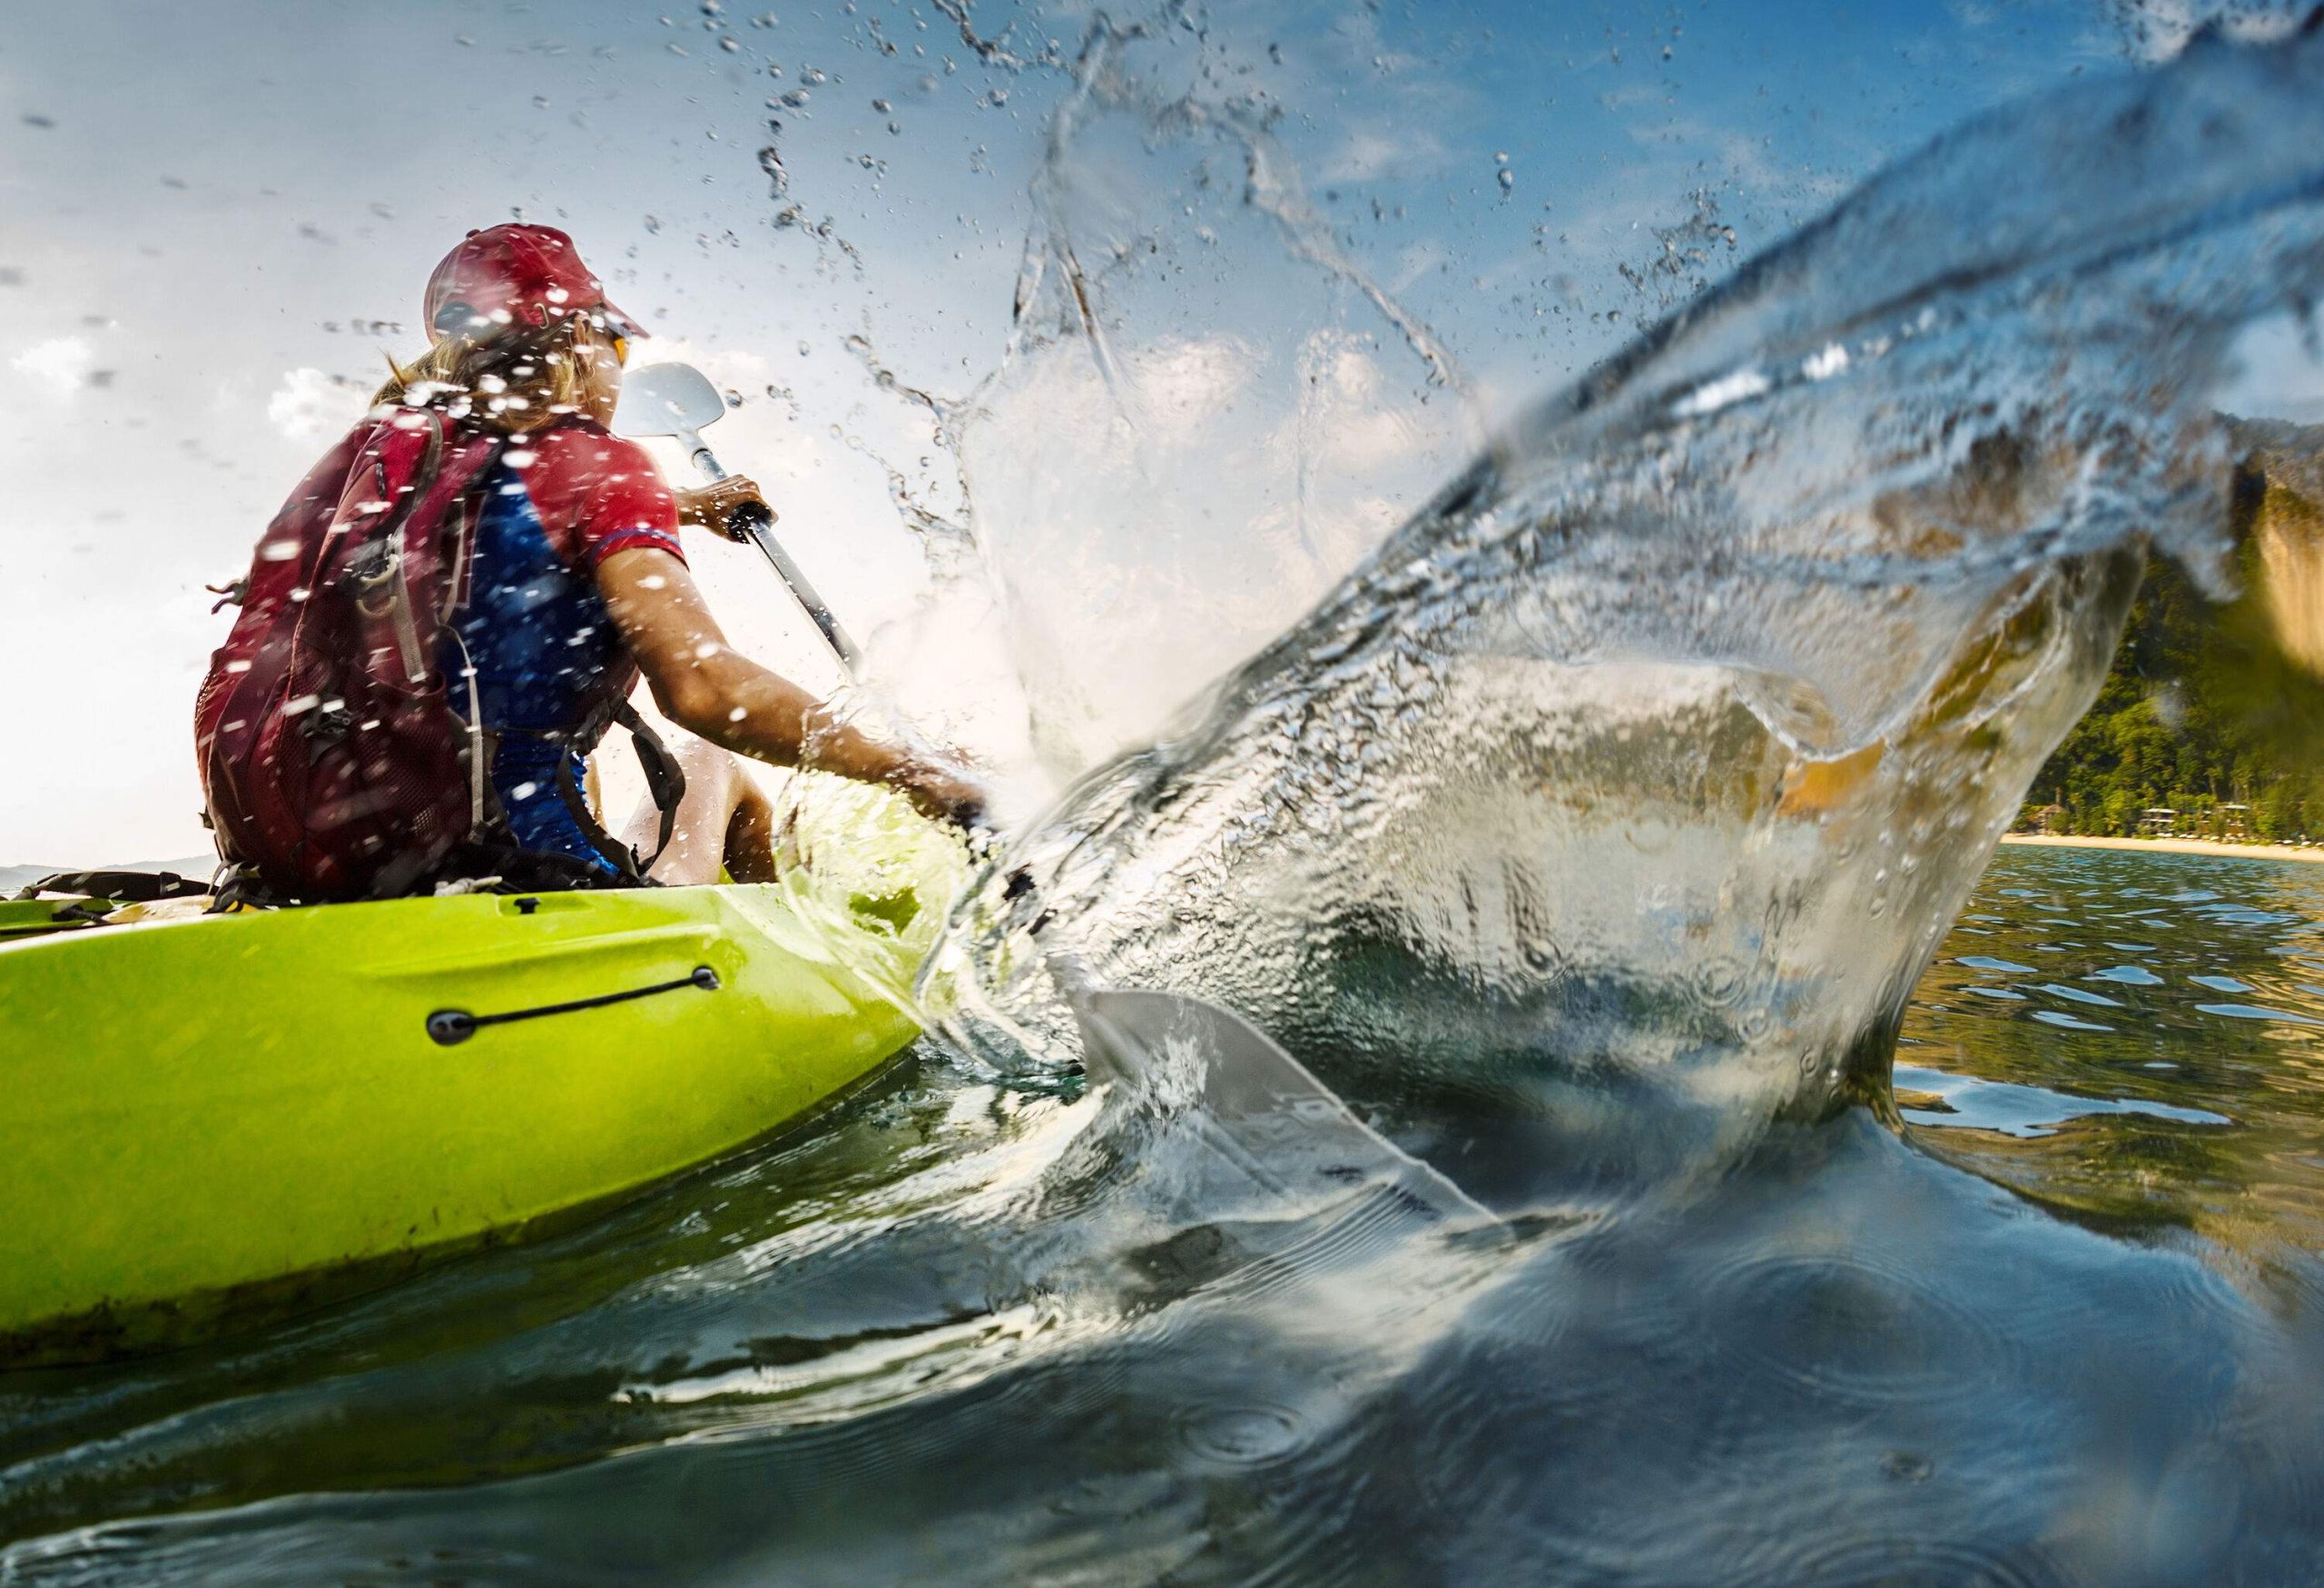 A blonde lady wearing a red cap on a kayak paddles against the water with splashes.